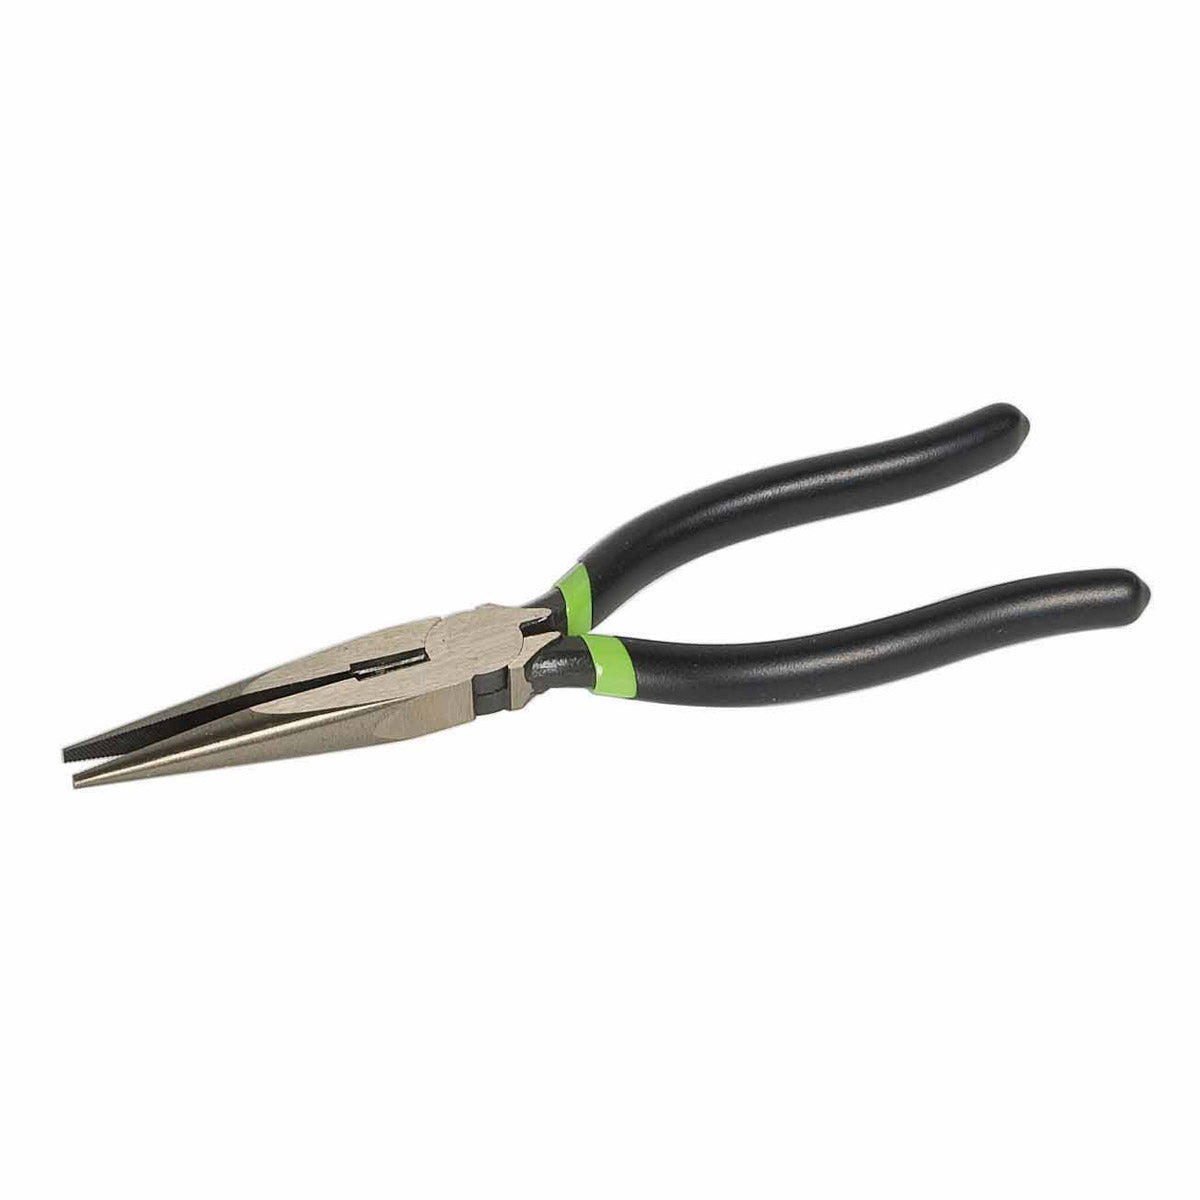 Greenlee 0351-07D Long Nose Pliers/Side Cutting 7in. Dipped Grip